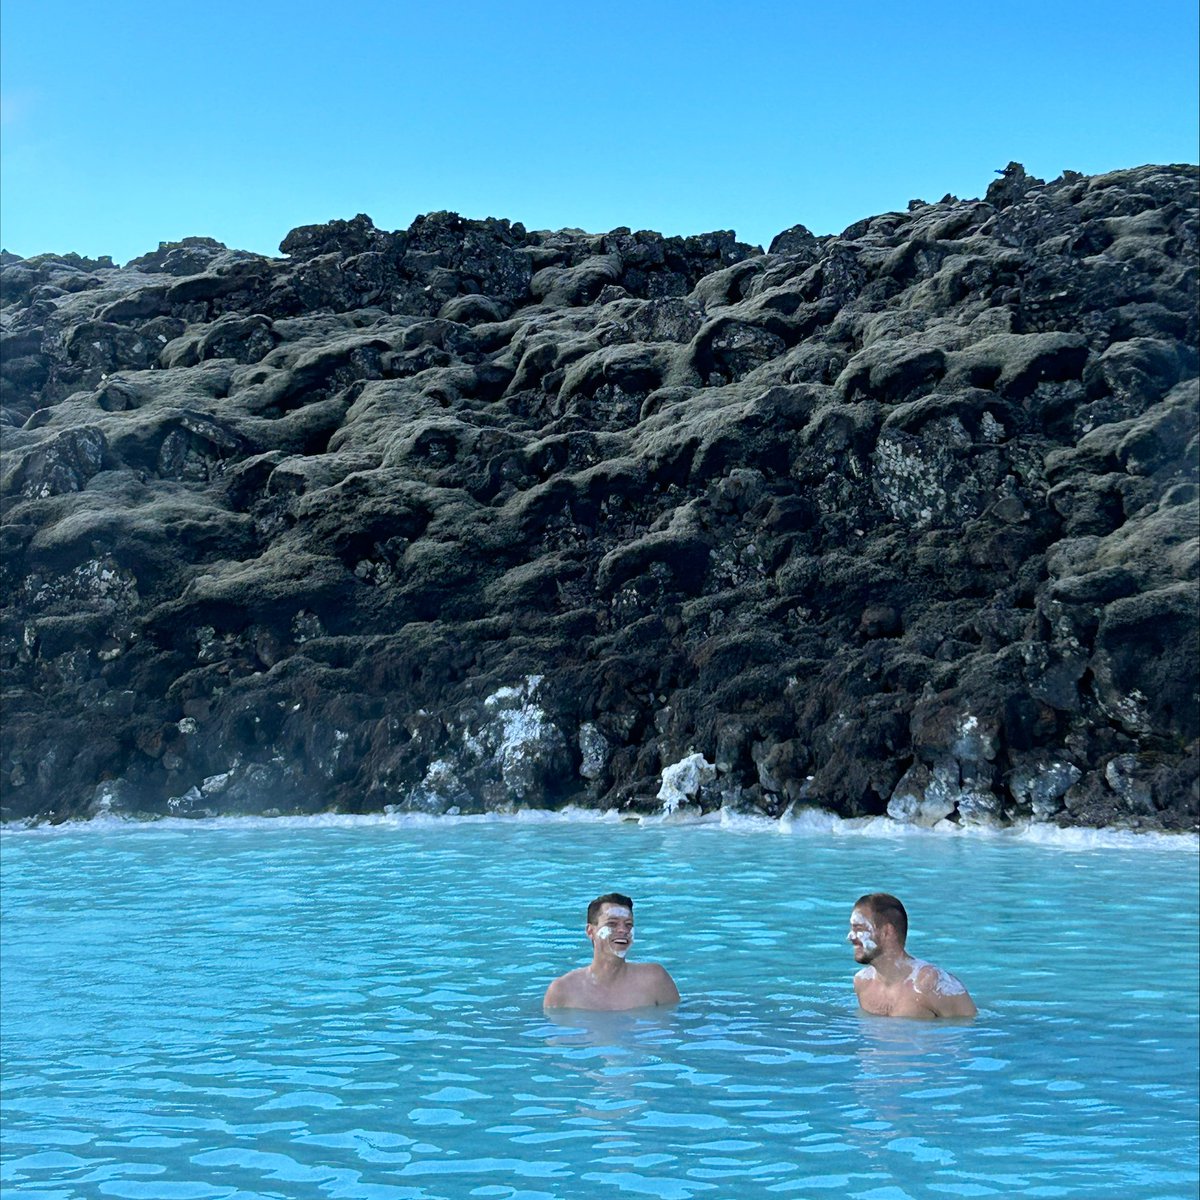 In all we do, our focus is on creating memories centered around wellbeing. It's the unforgettable moments that count. 🩵 Can't wait for you to make some memories on your next visit! #BlueLagoonIceland #Iceland